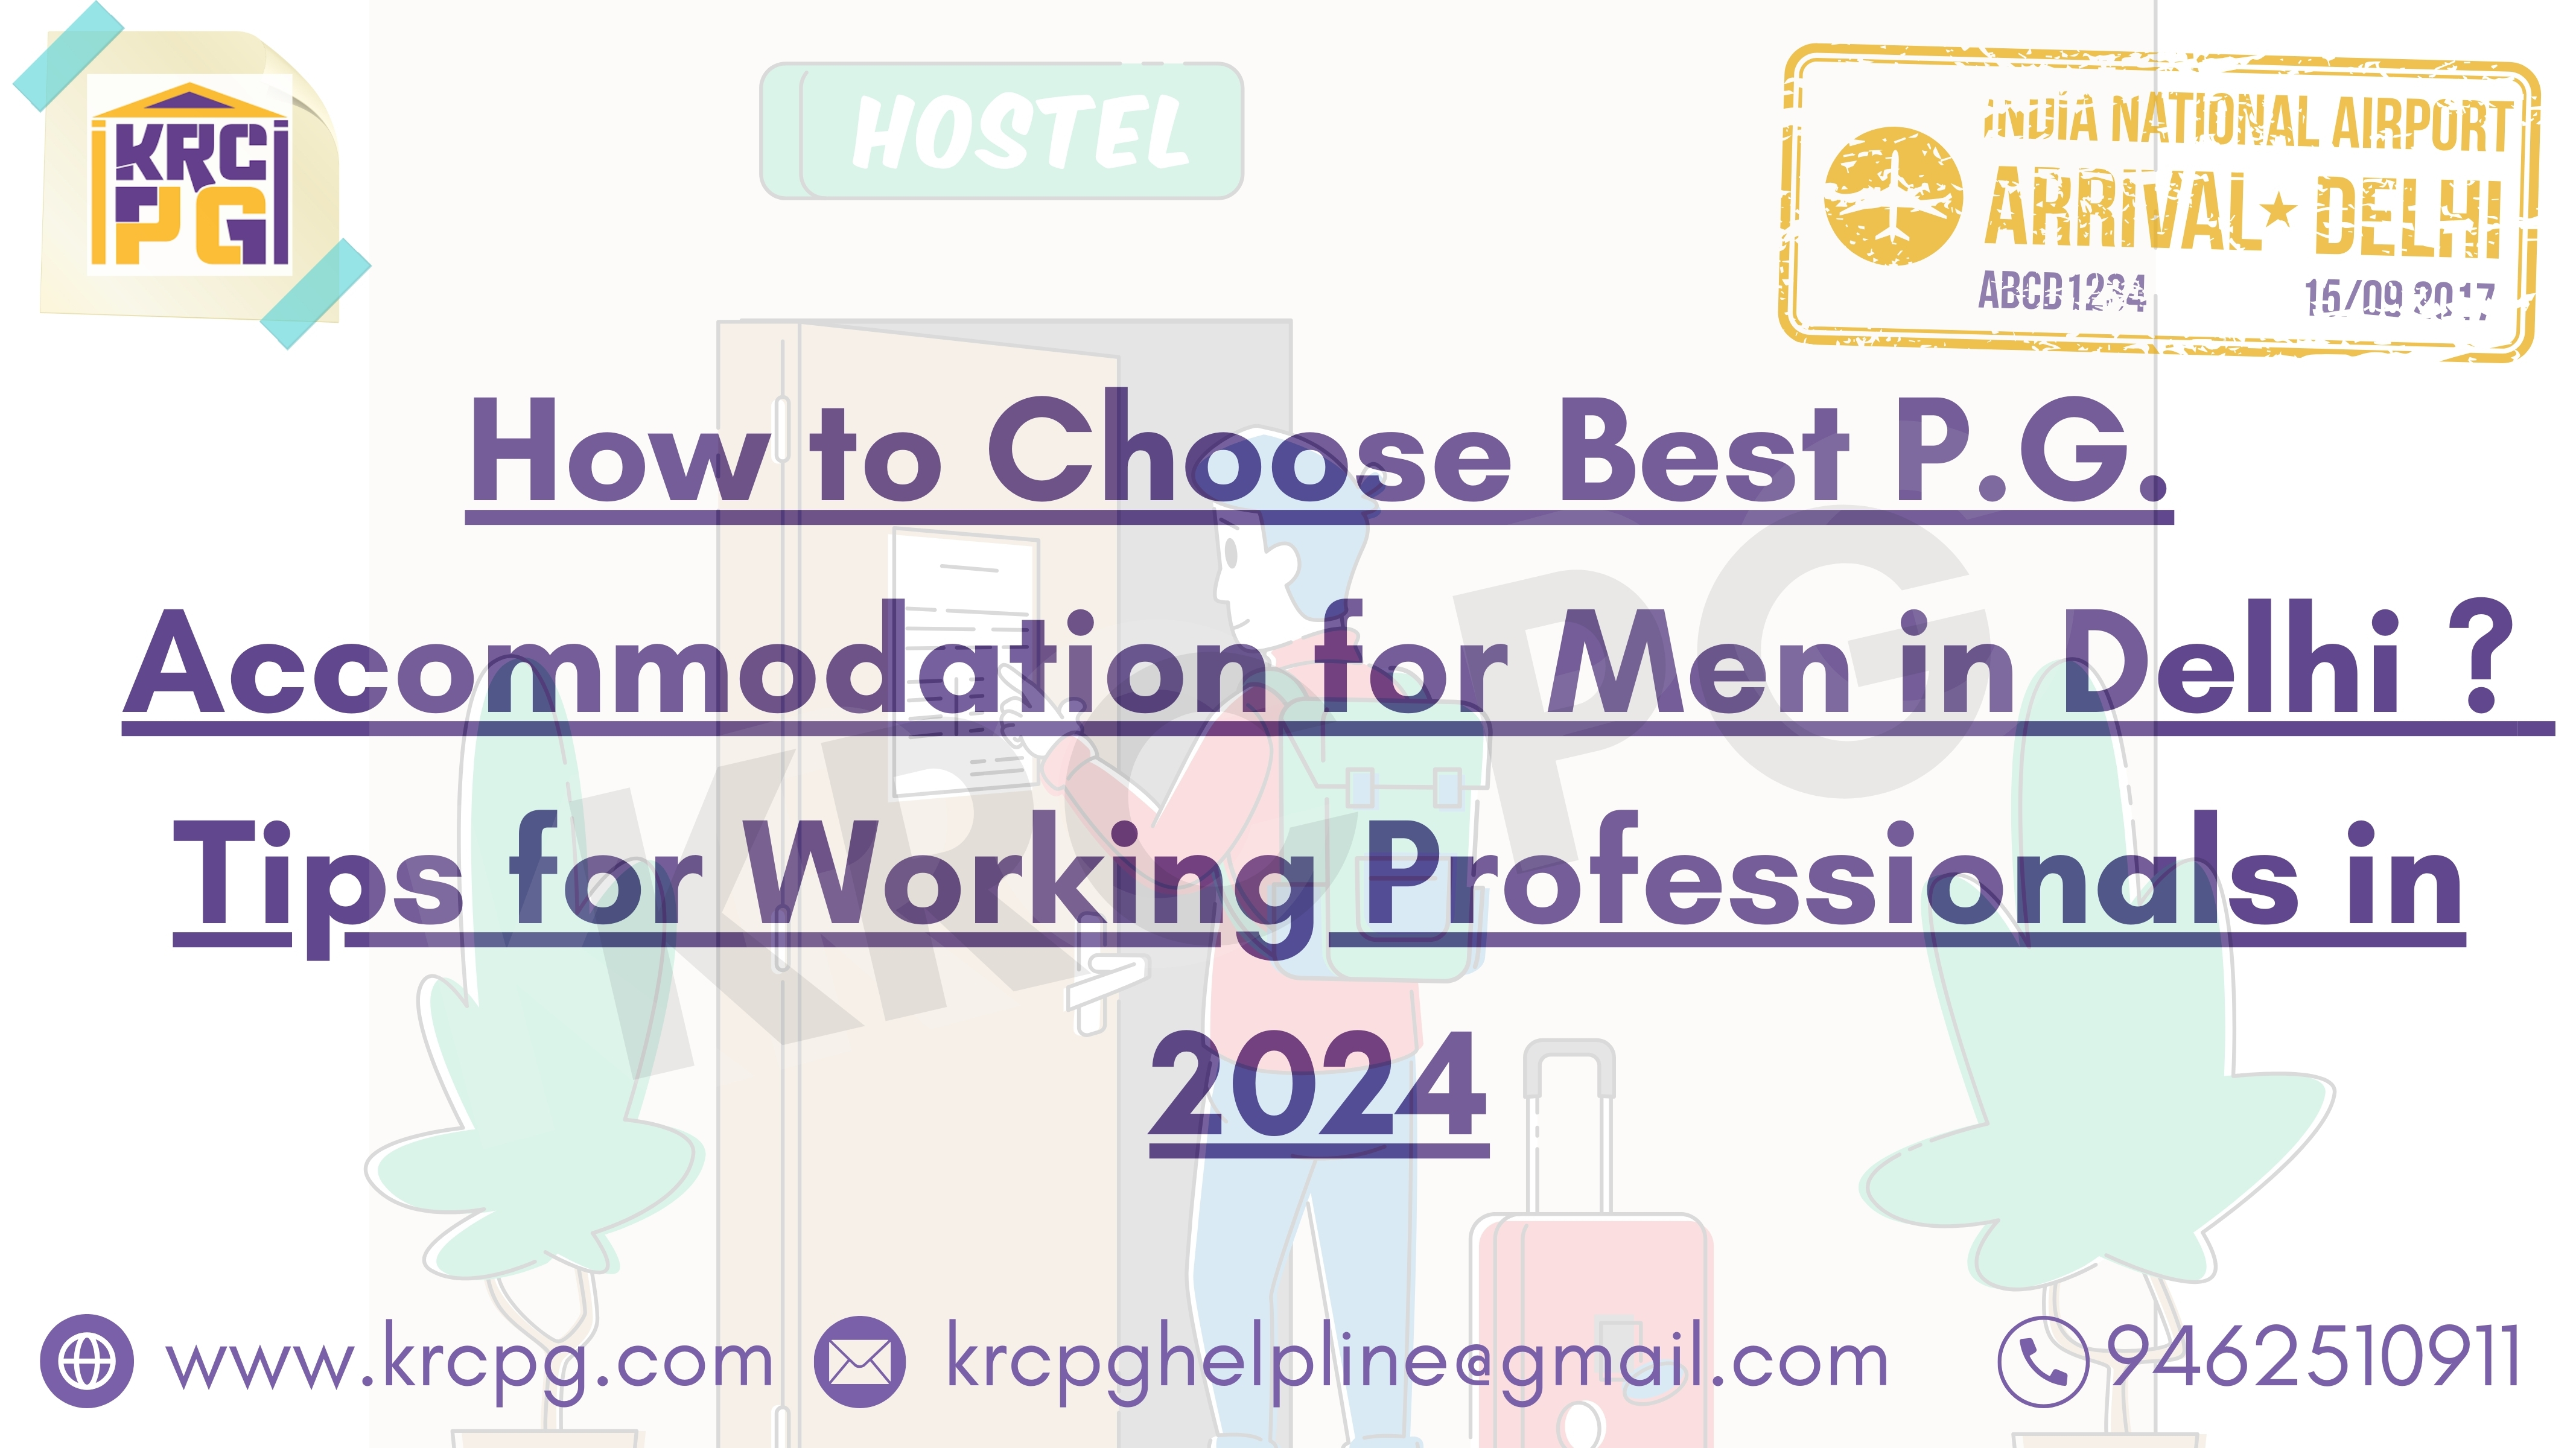 HOW TO CHOOSE THE BEST P.G. ACCOMMODATION FOR MEN IN DELHI? TIPS FOR WORKING PROFESSIONALS IN 2024